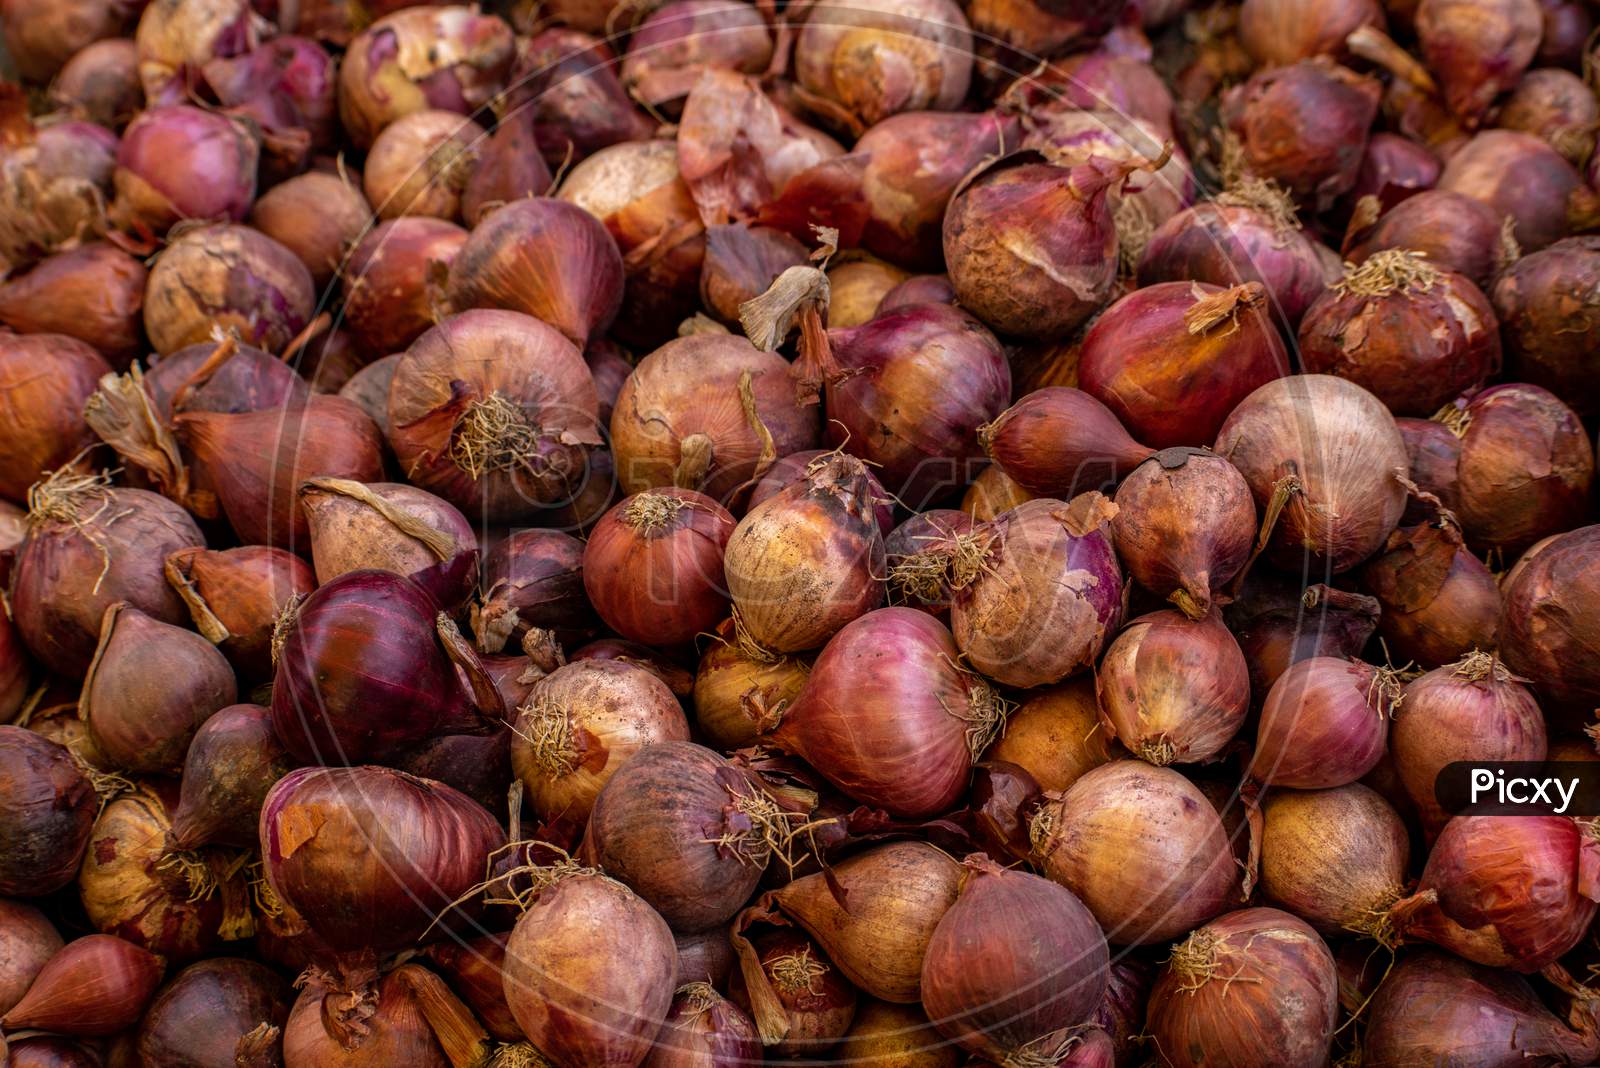 Fresh organic Onions kept for sale in a market